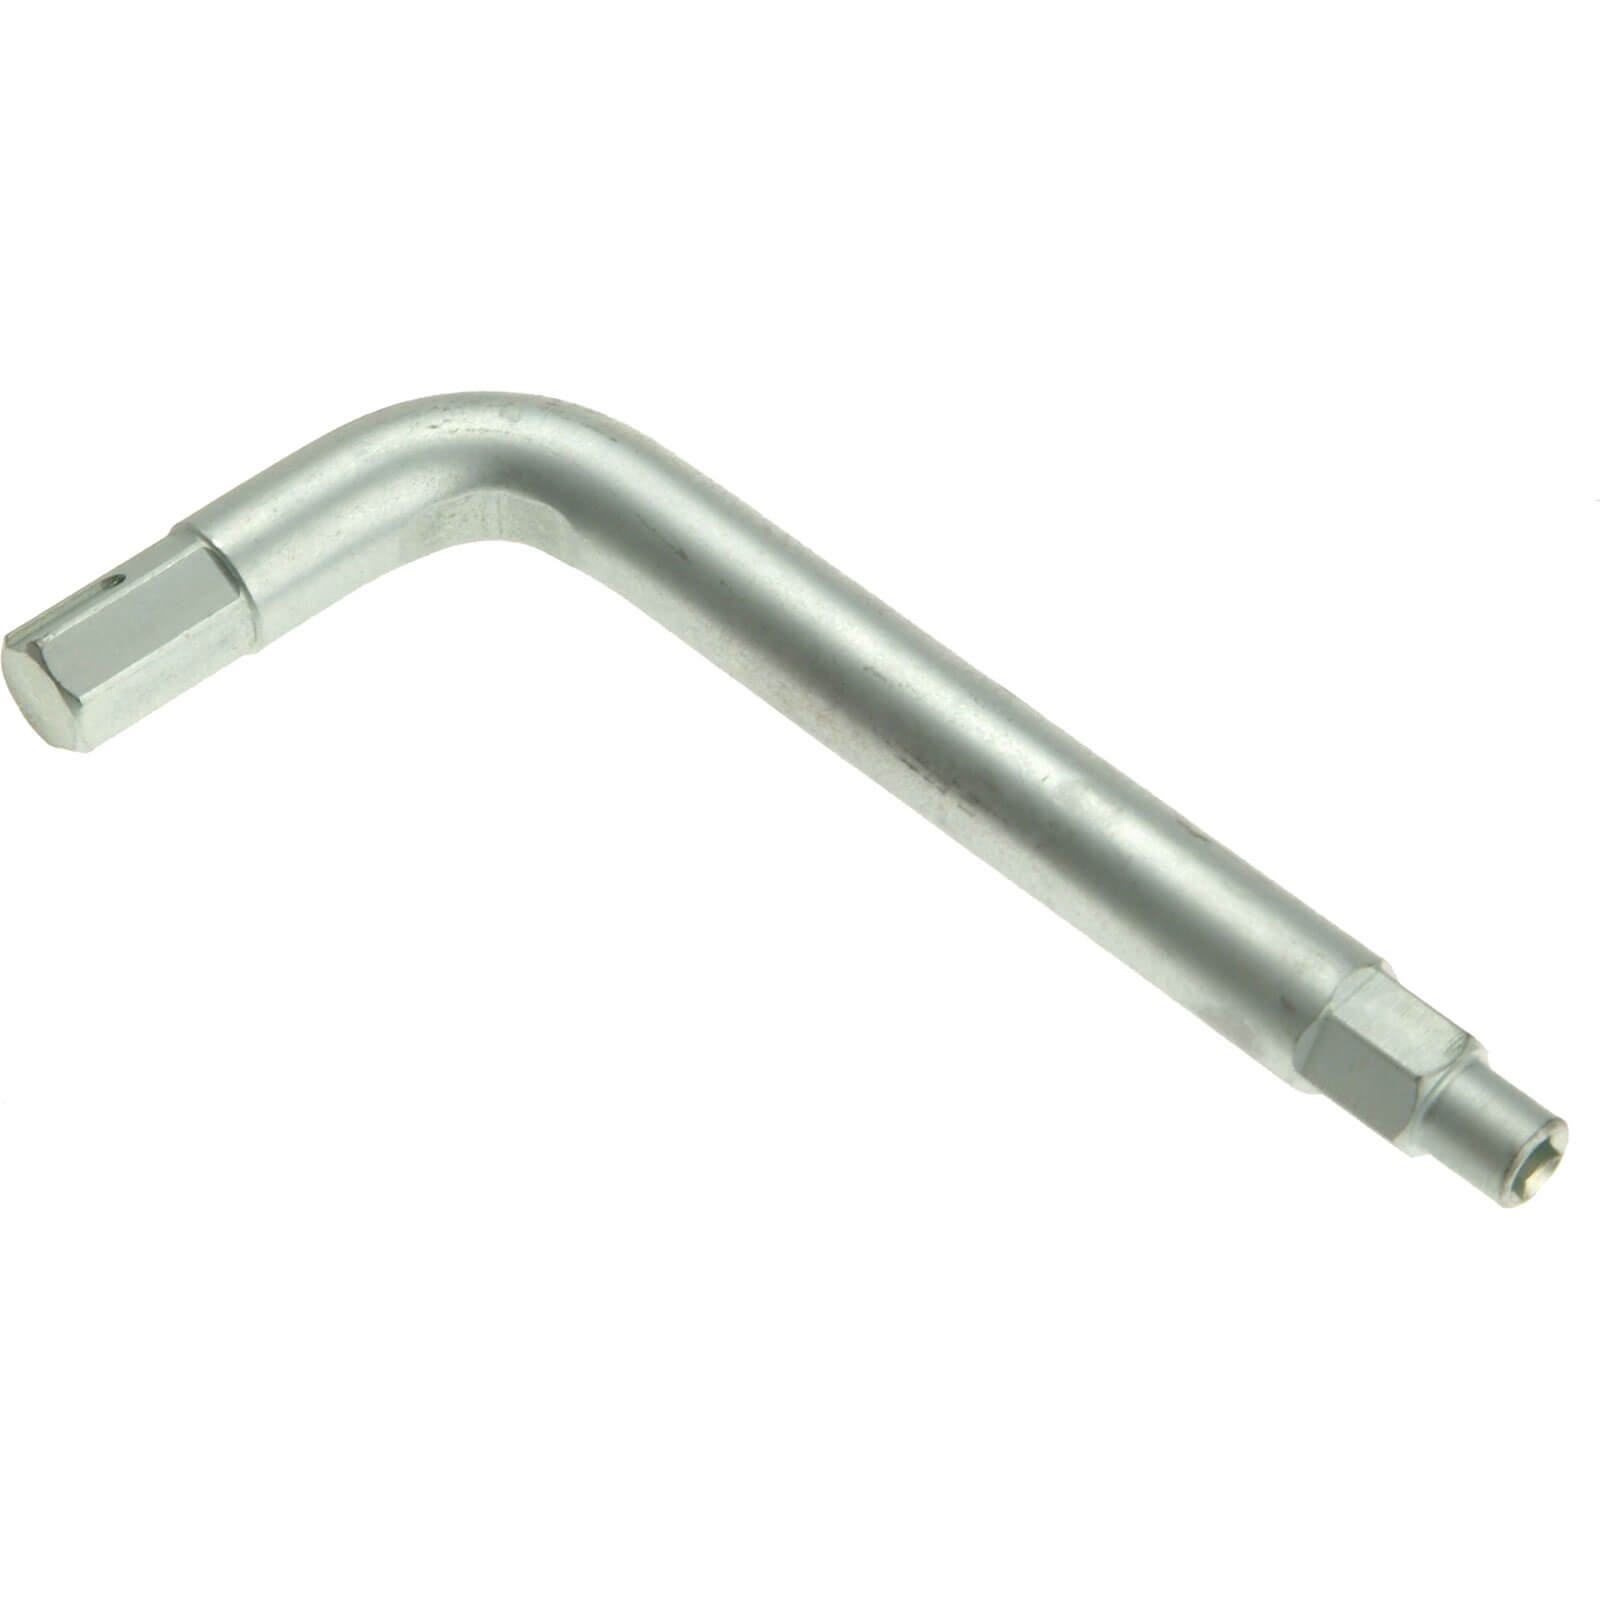 Photo of Monument 2054x Radiator Spanner Air Release Key